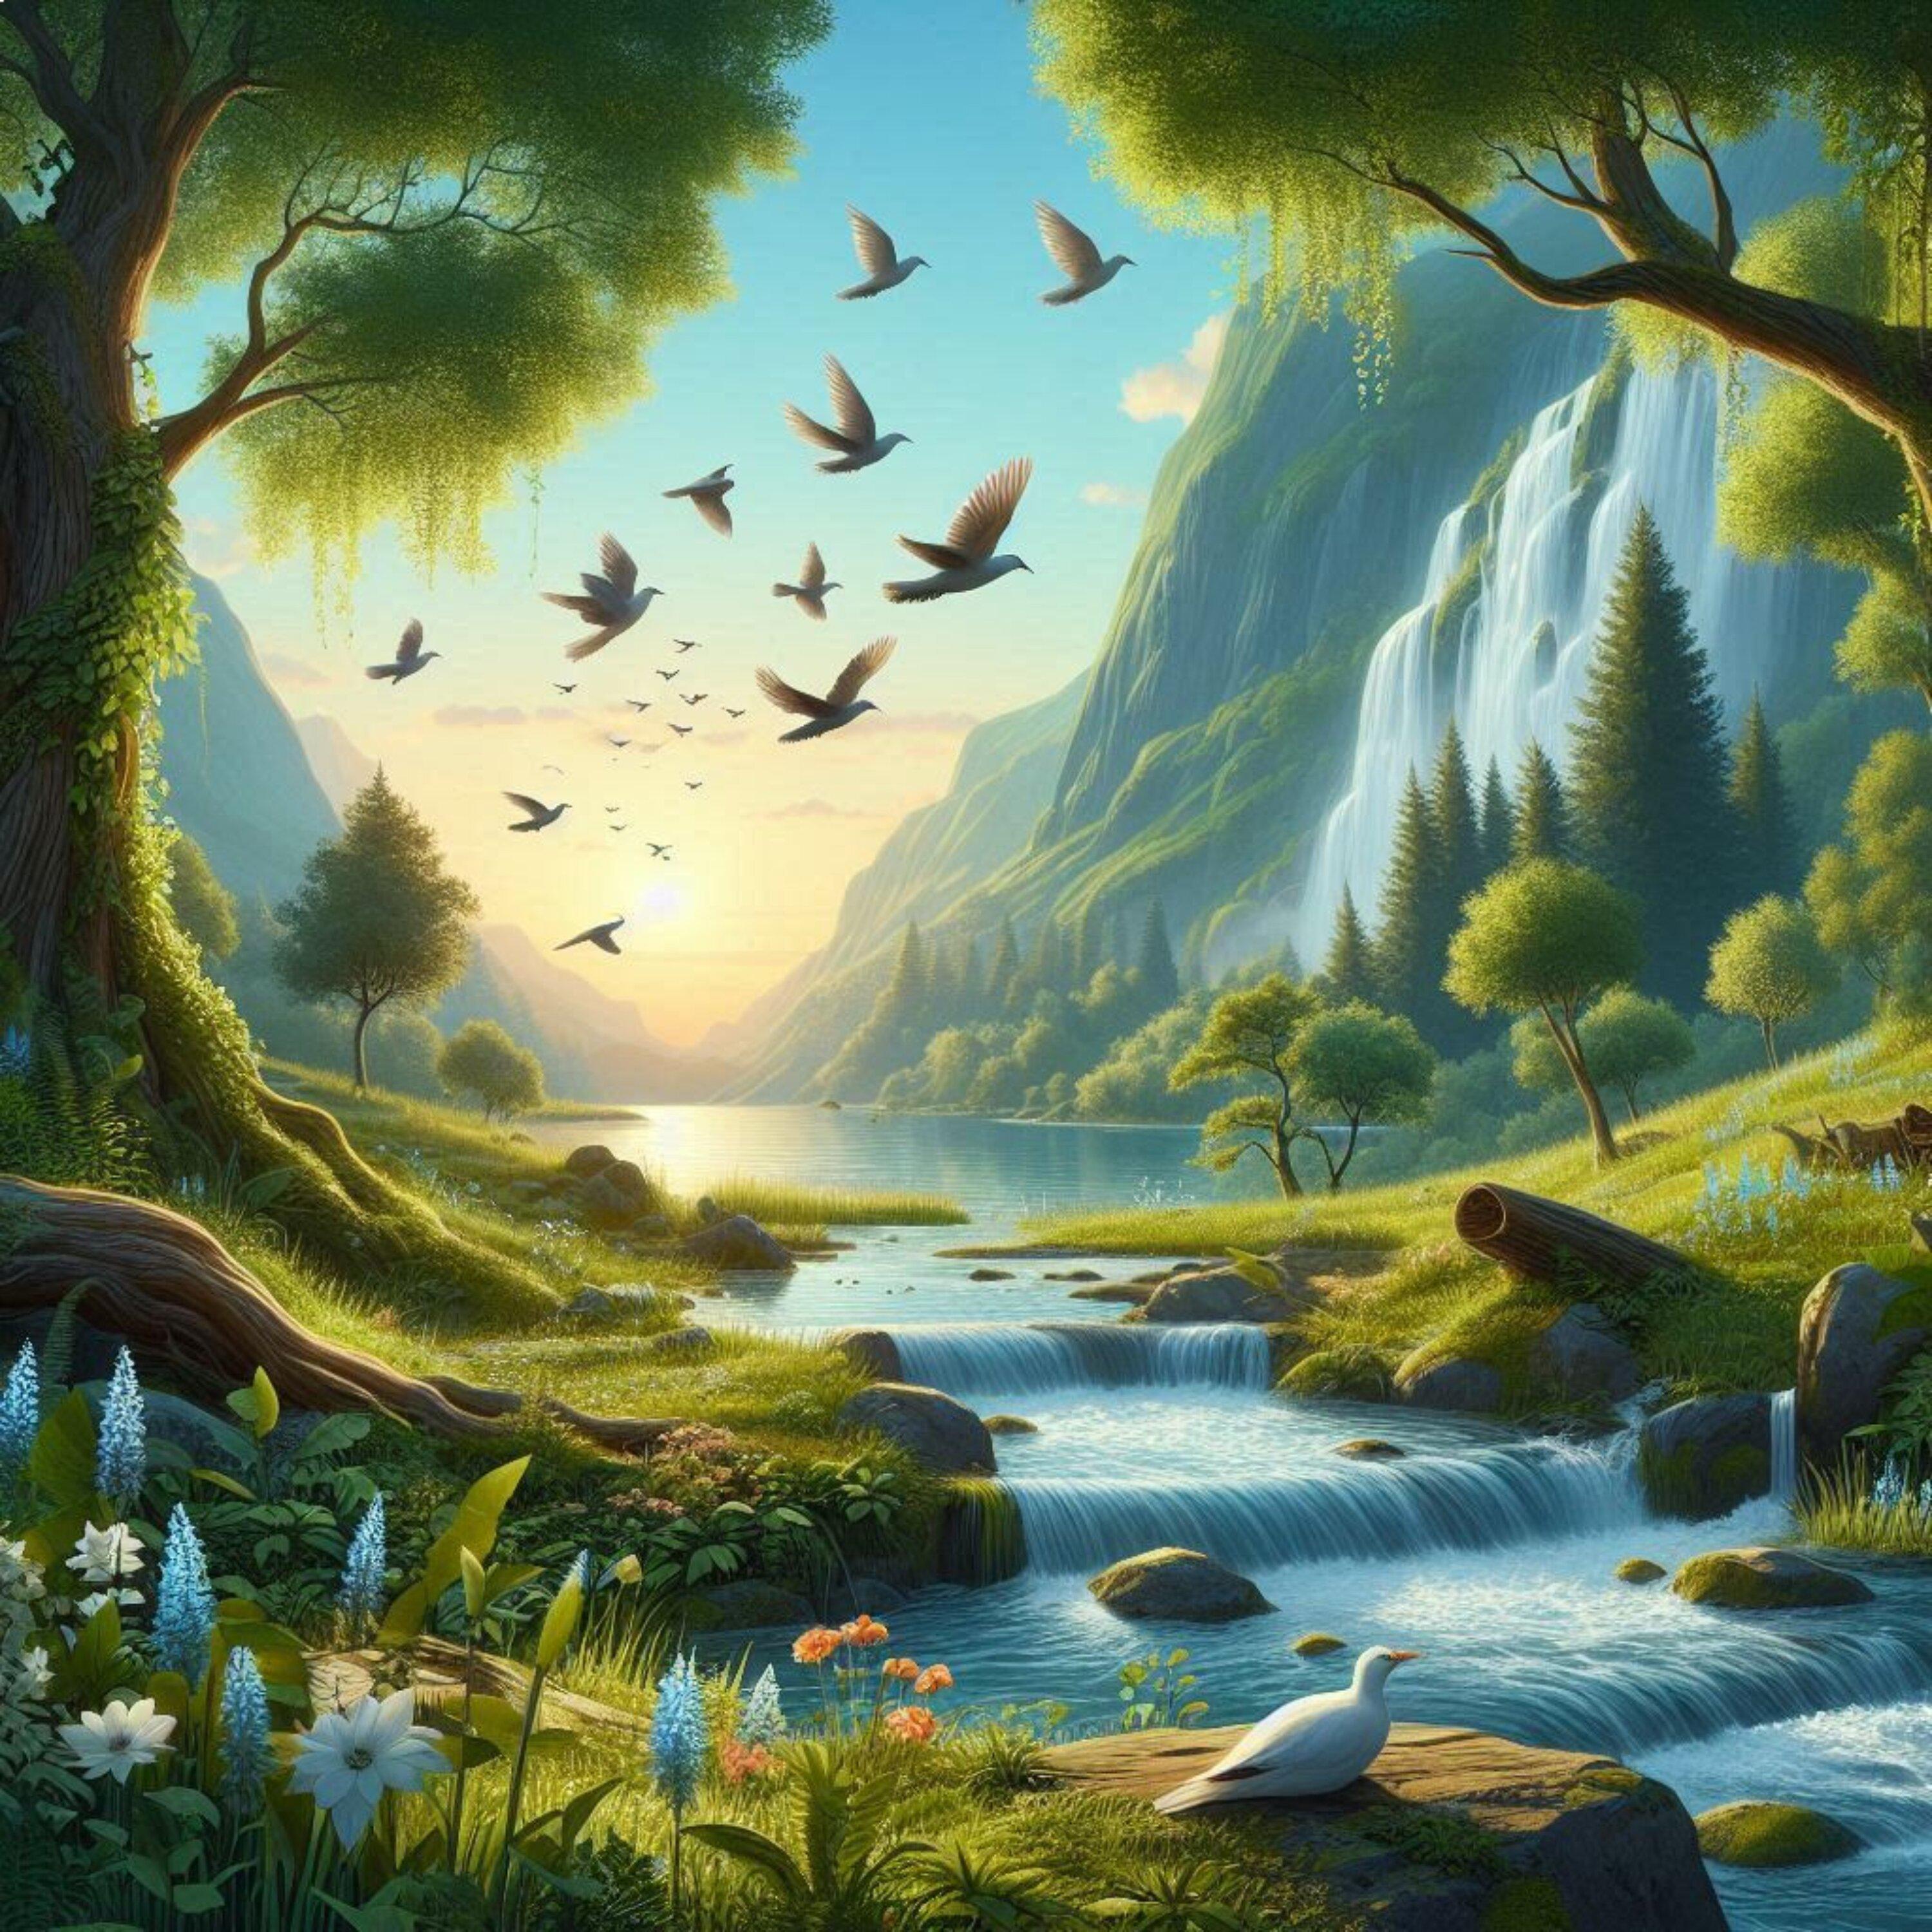 Zarek Atlas - Relaxing Landscape with Birds and Flowing Water in the Background 6